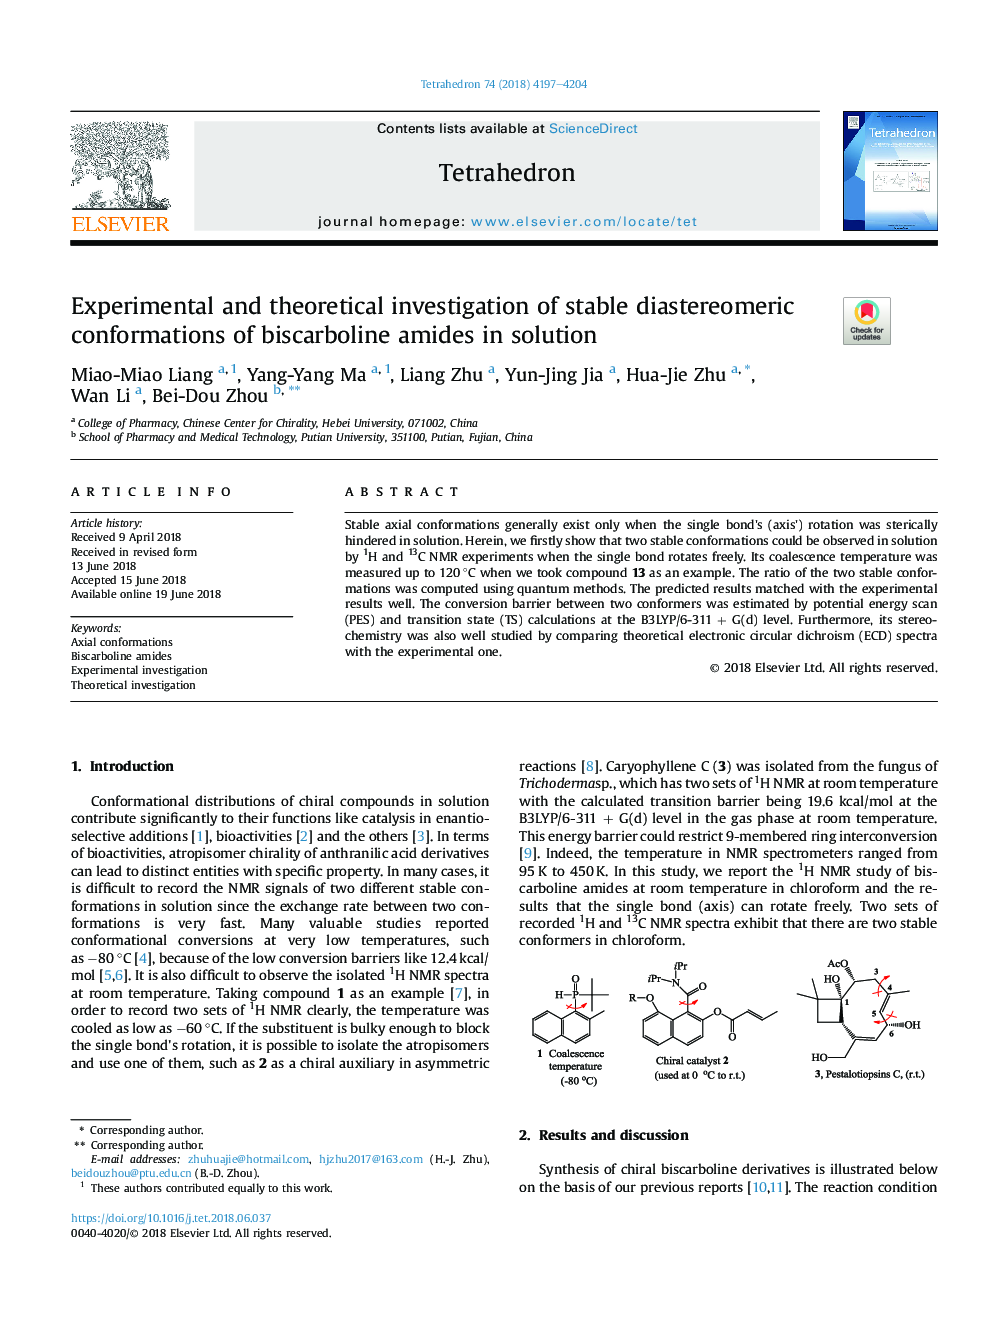 Experimental and theoretical investigation of stable diastereomeric conformations of biscarboline amides in solution